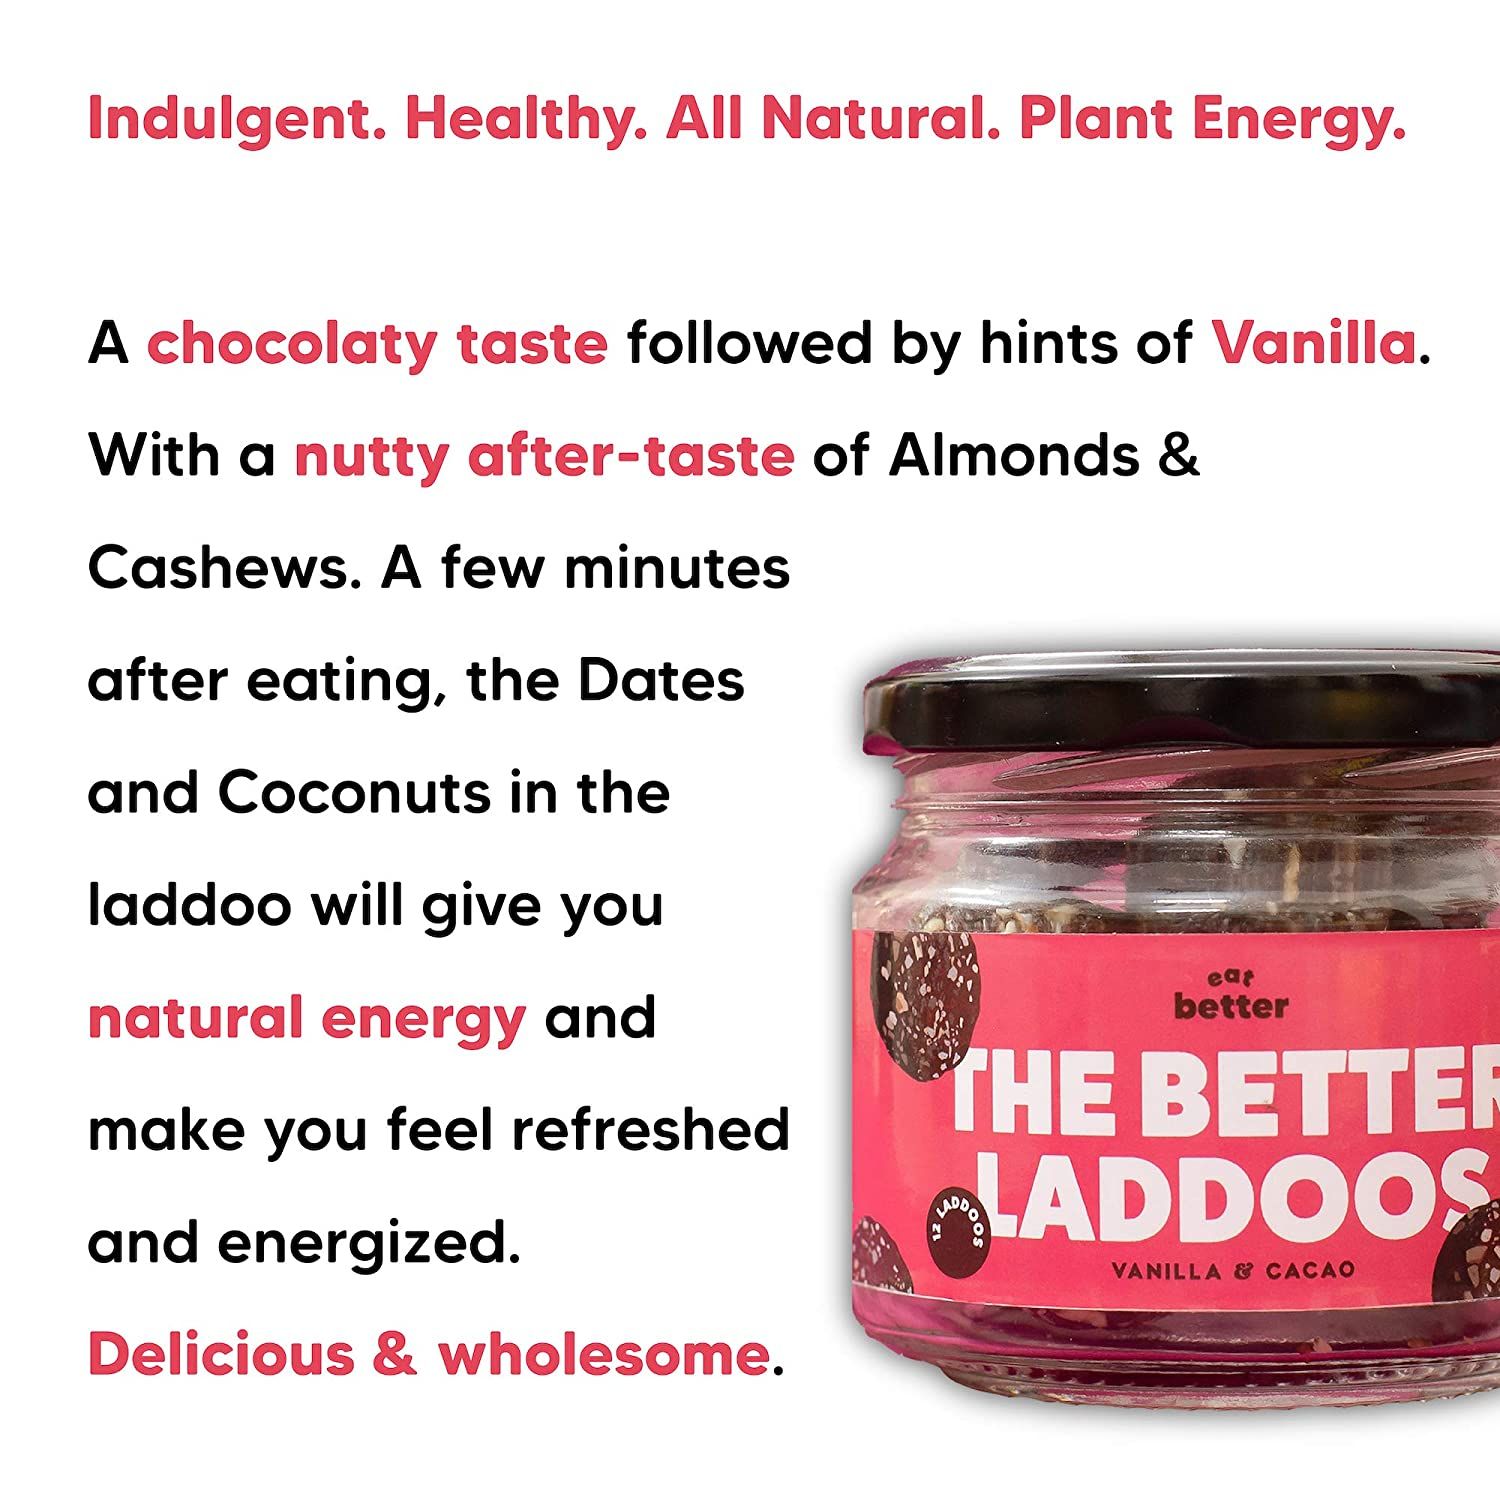 Eat Better The Better Ladoo Vanilla & Cacao Image